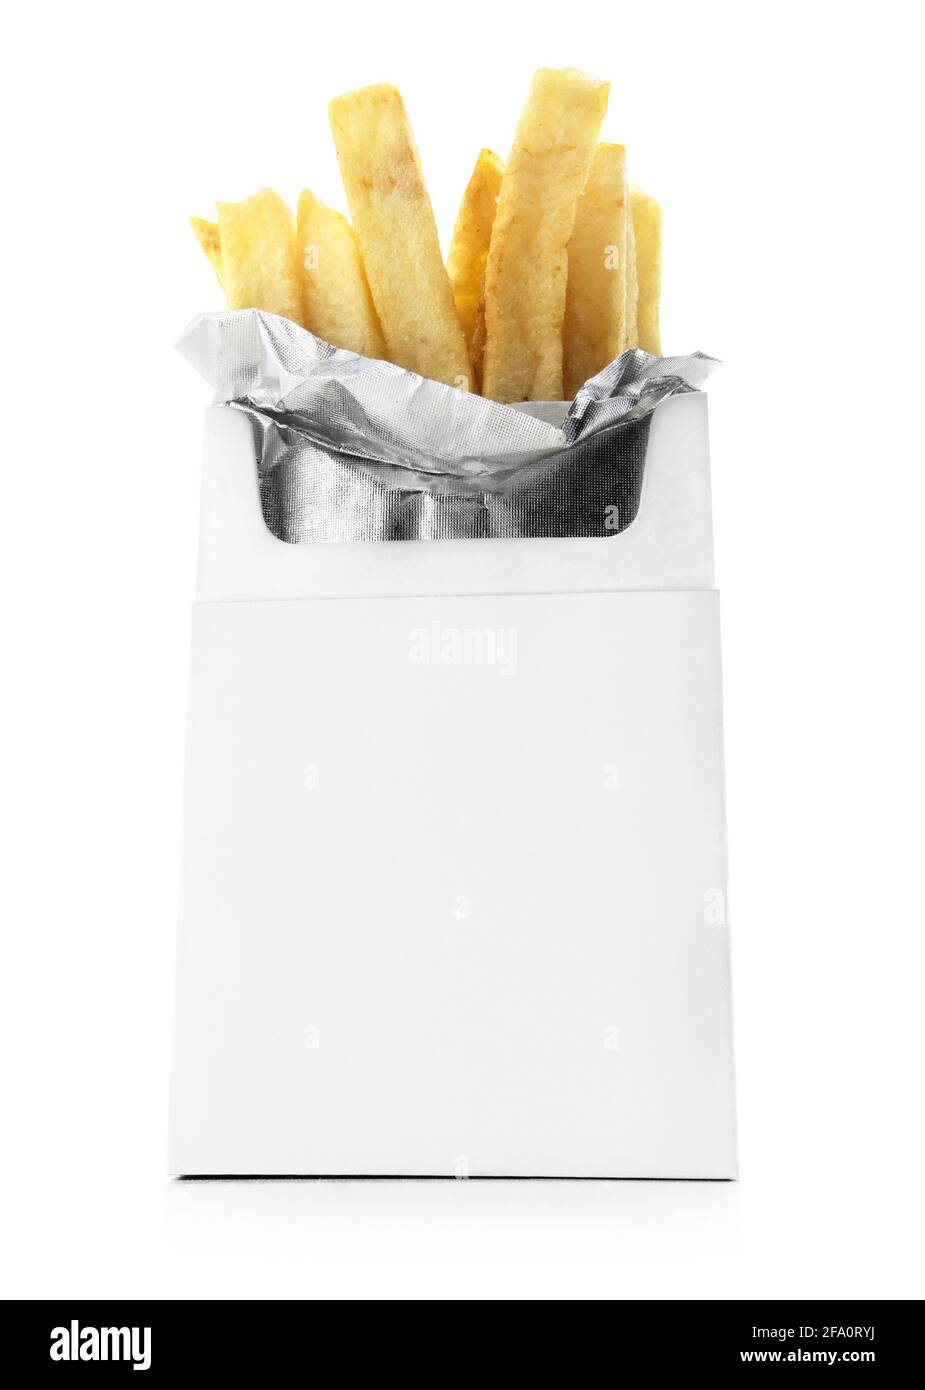 Unhealthy Lifestyle - Cigarettes And French Fries Stock Photo